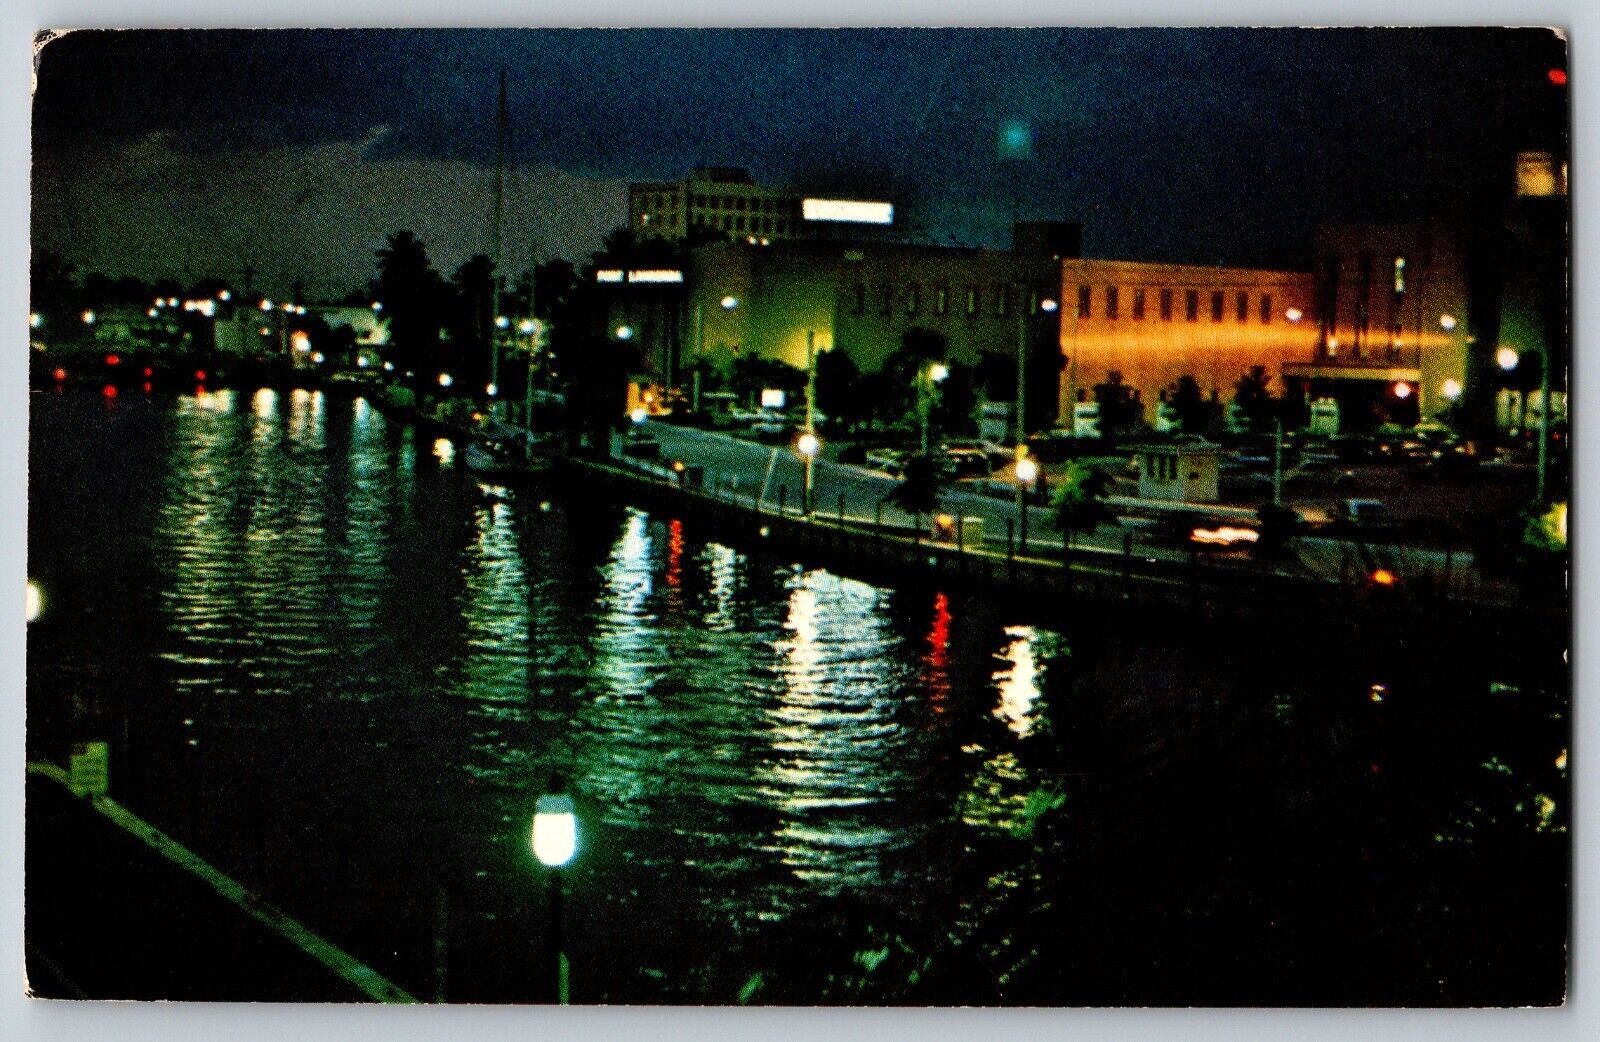 Fort Lauderdale, Florida FL - Mysterious New River at Night - Vintage Postcard